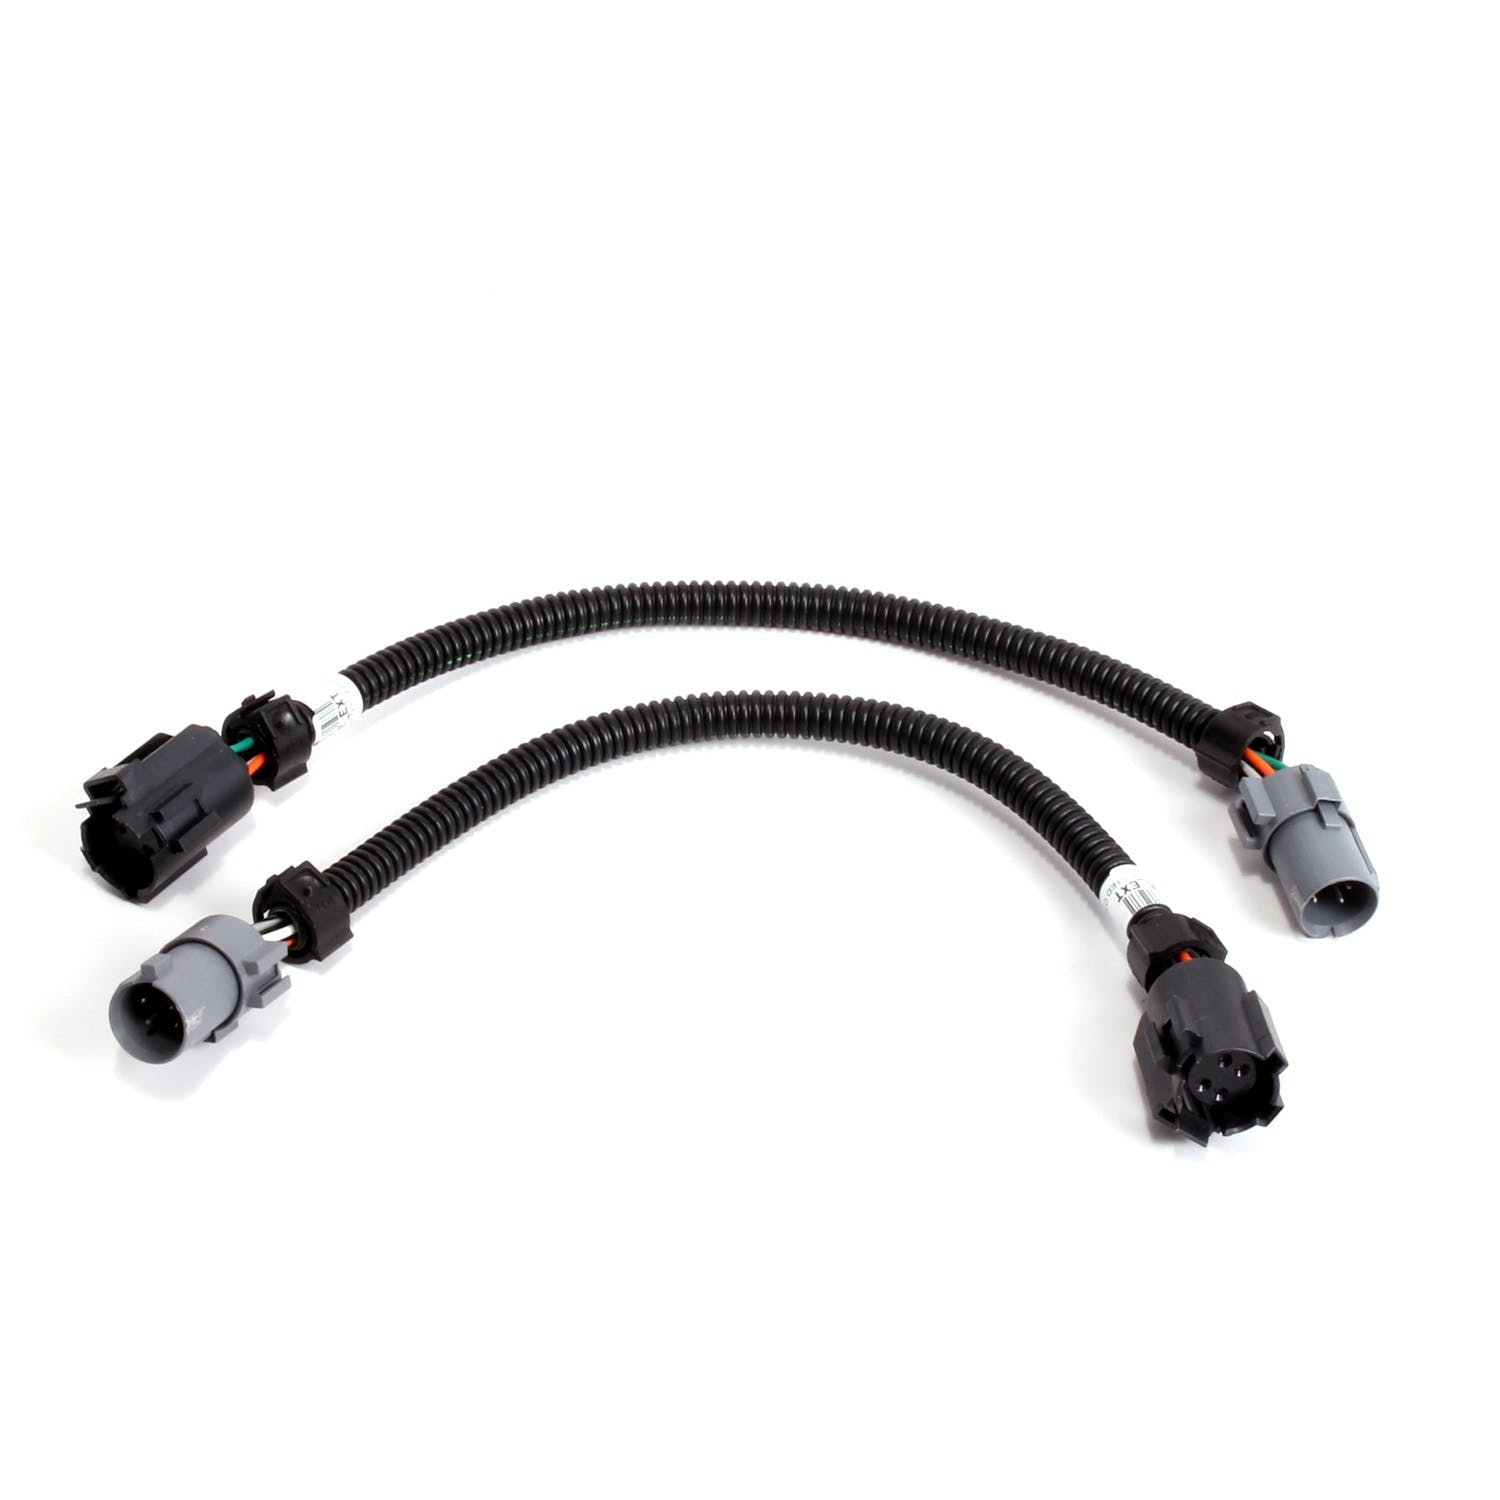 BBK Performance Parts 1117 O2 Sensor Wire Extension Harness